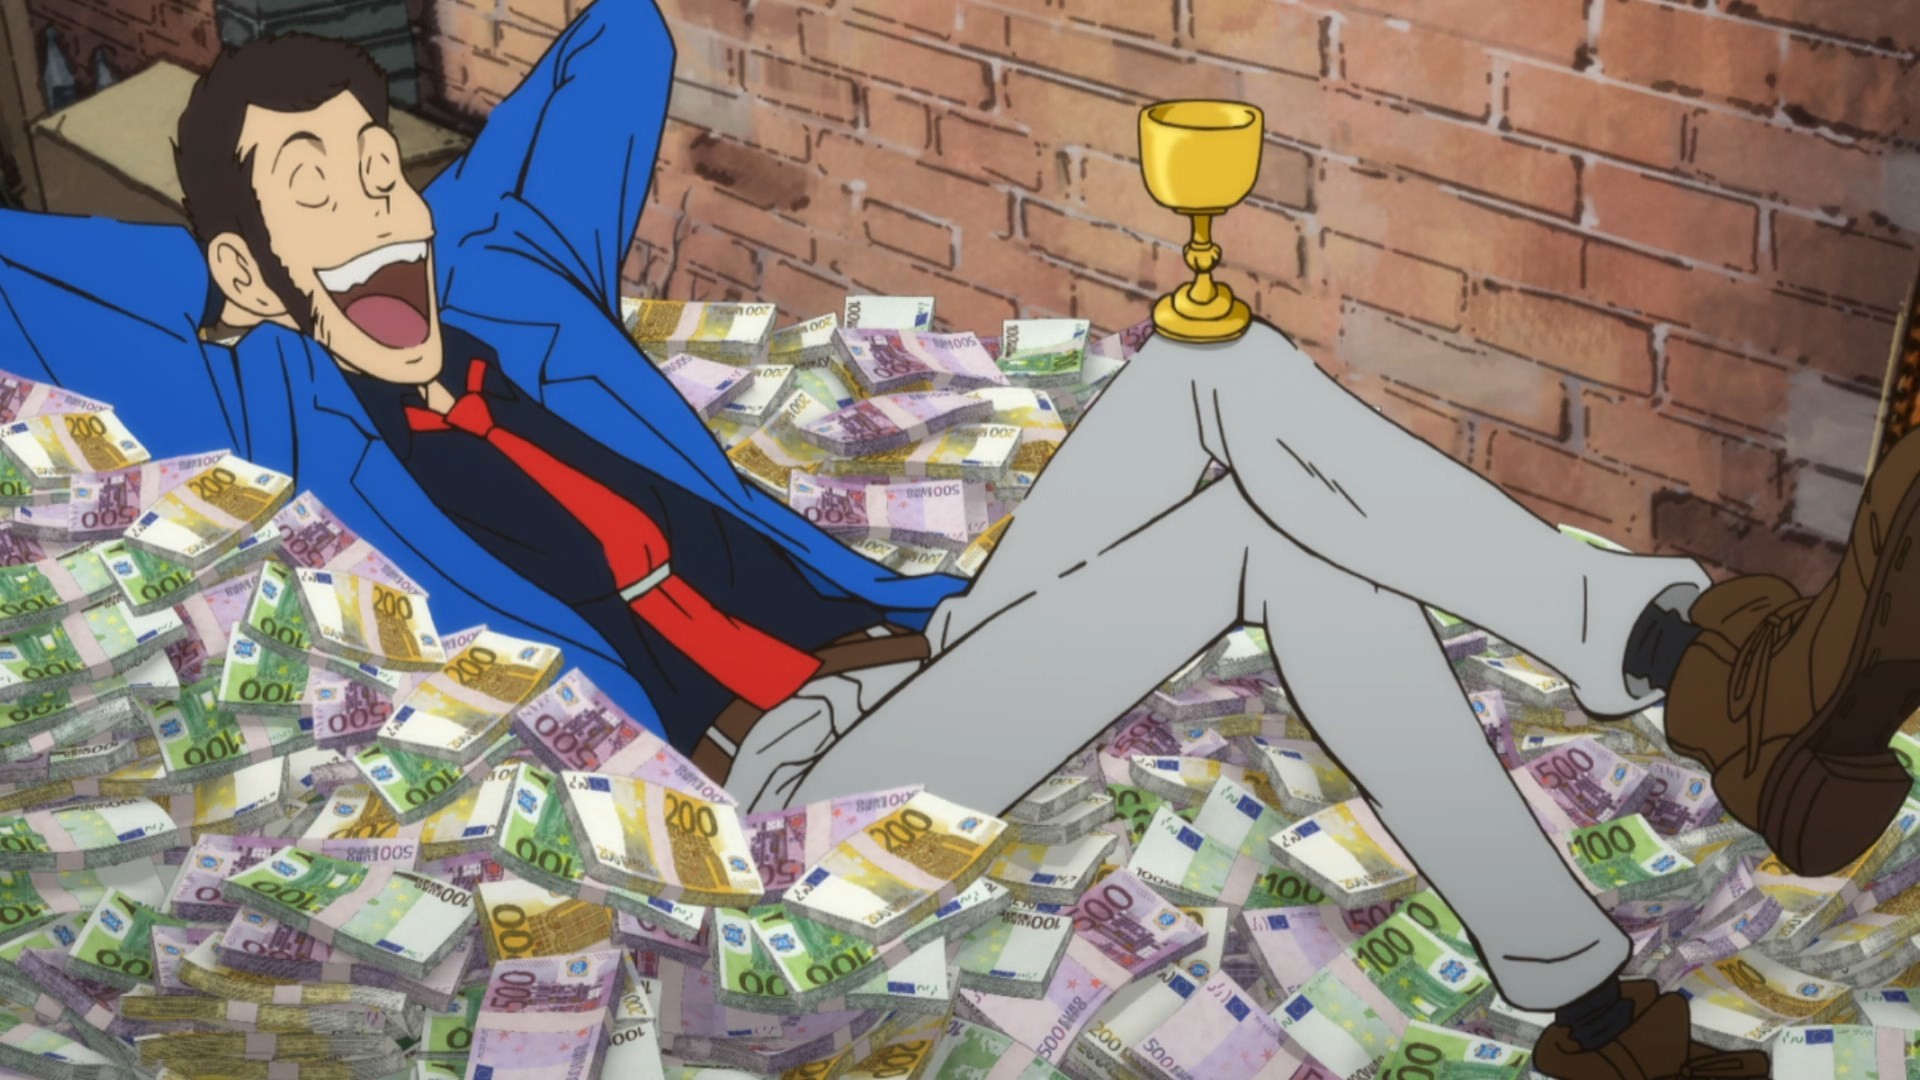 1920x1080 Lupin the Third PART4 17